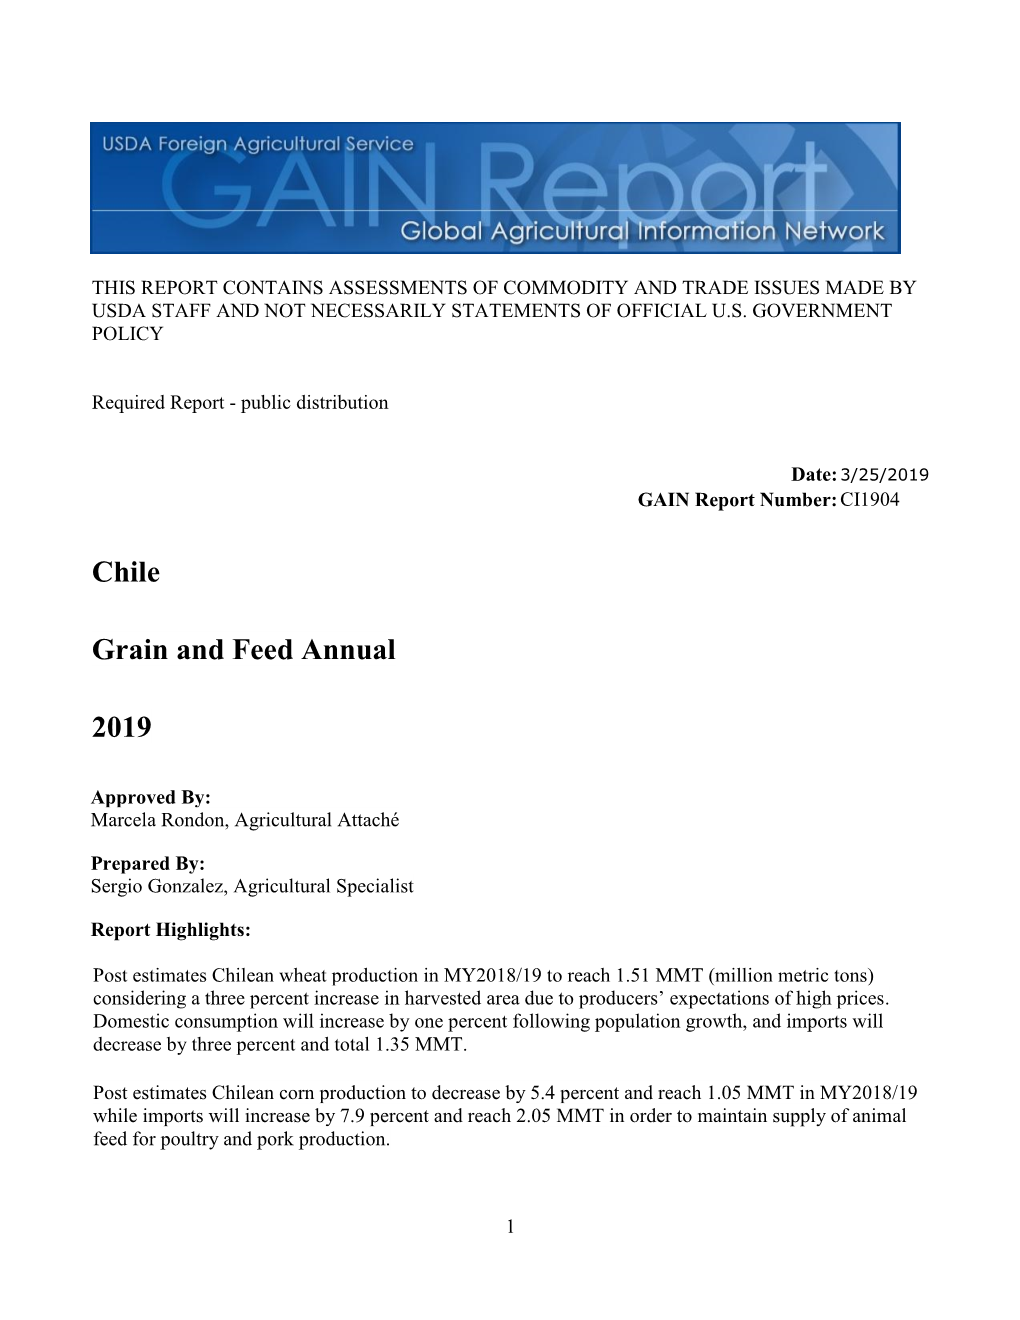 Chile Grain and Feed Annual 2019